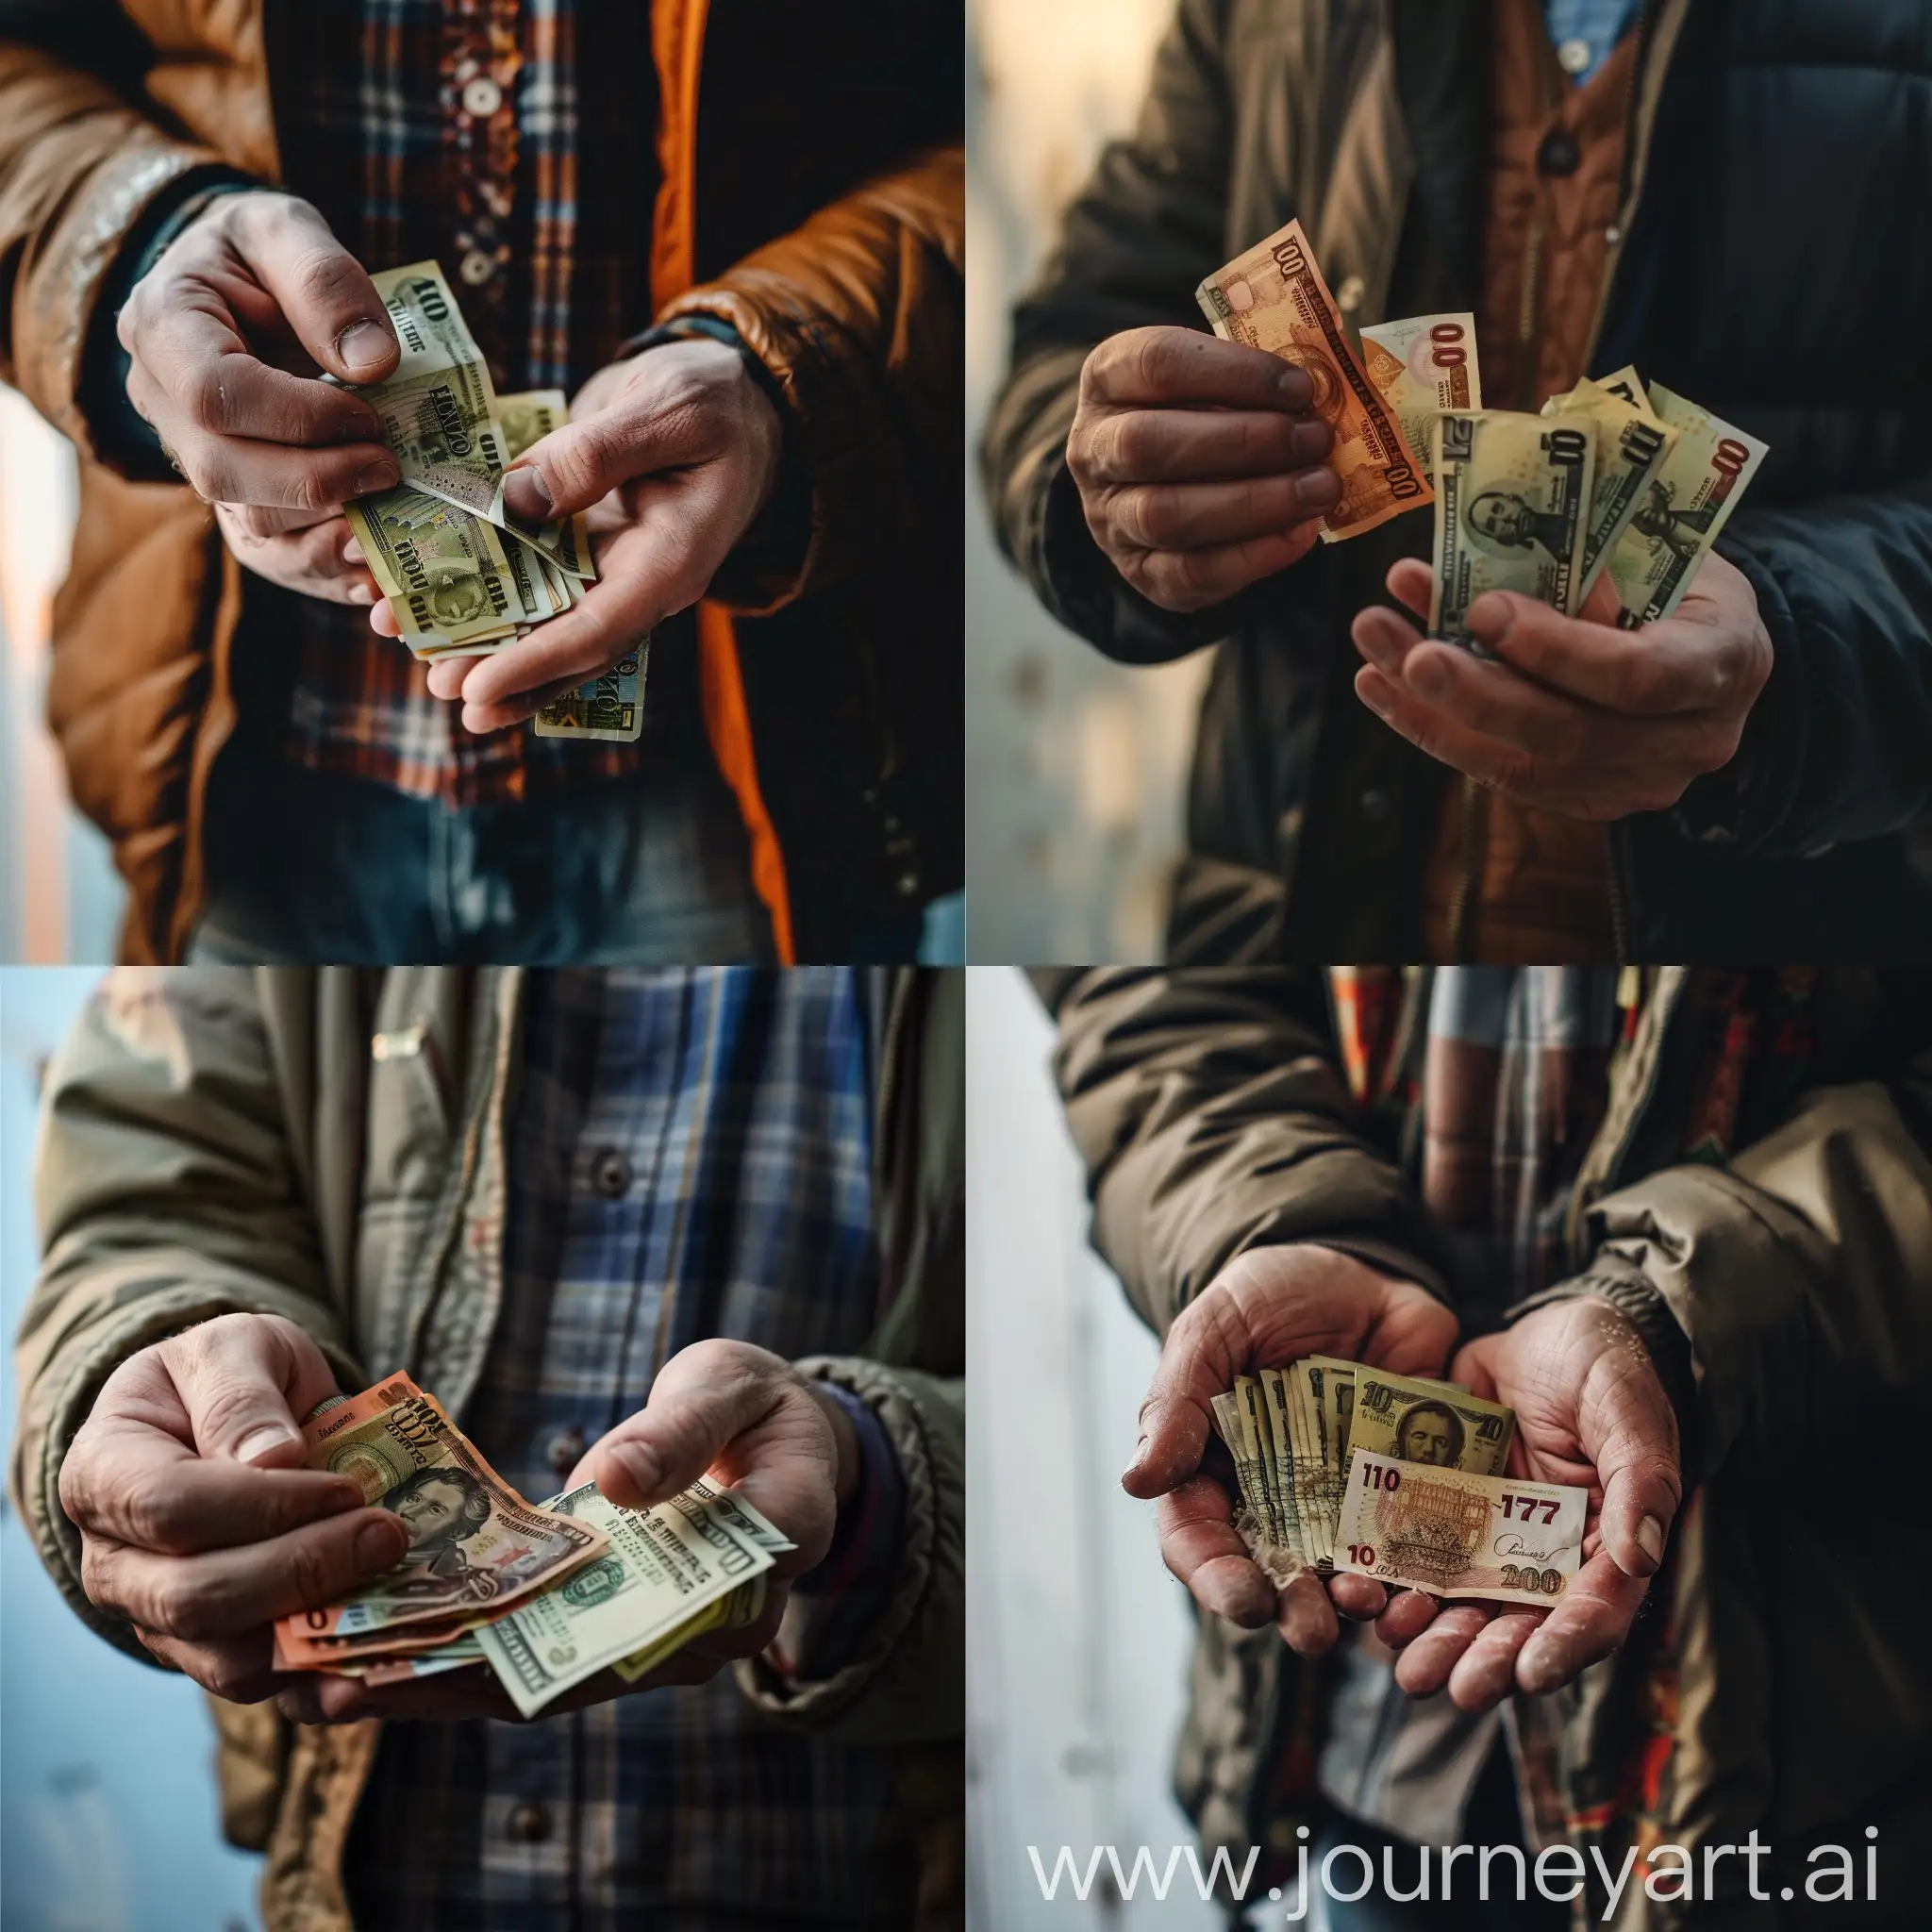 a man holds 137 rubles in his hands